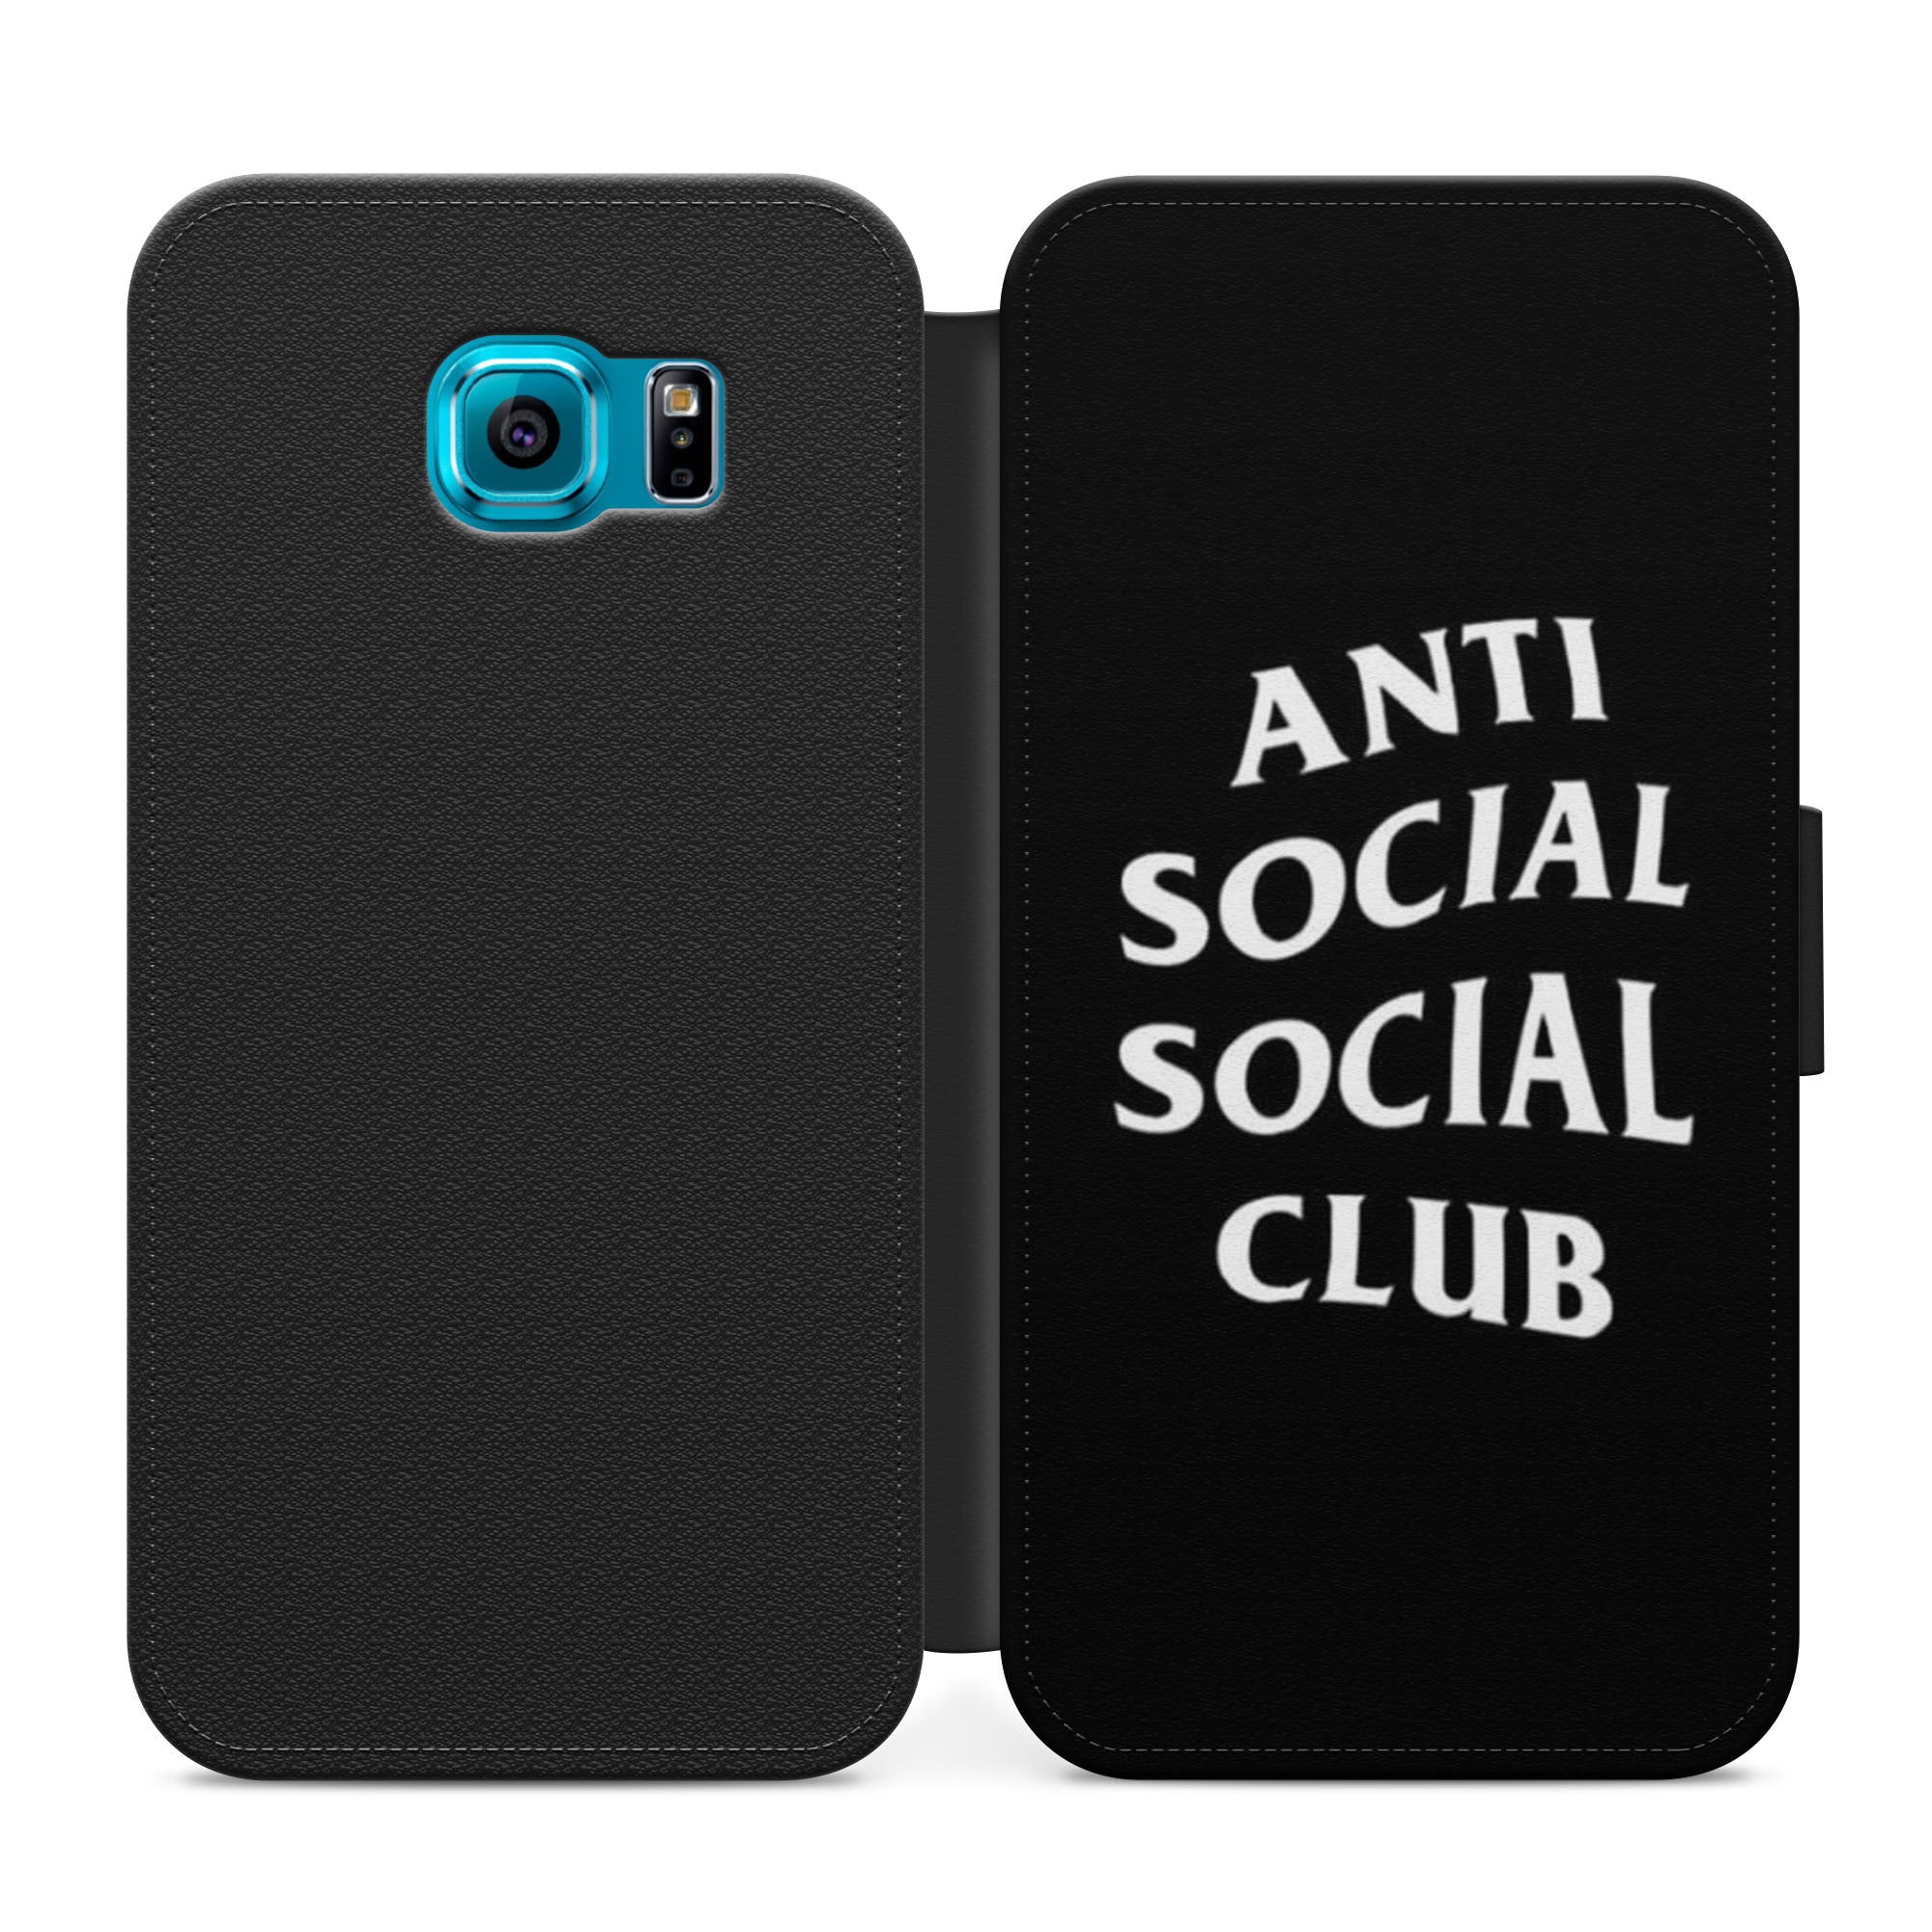 Anti Social Social Club Faux Leather Flip Case Wallet for iPhone / Samsung